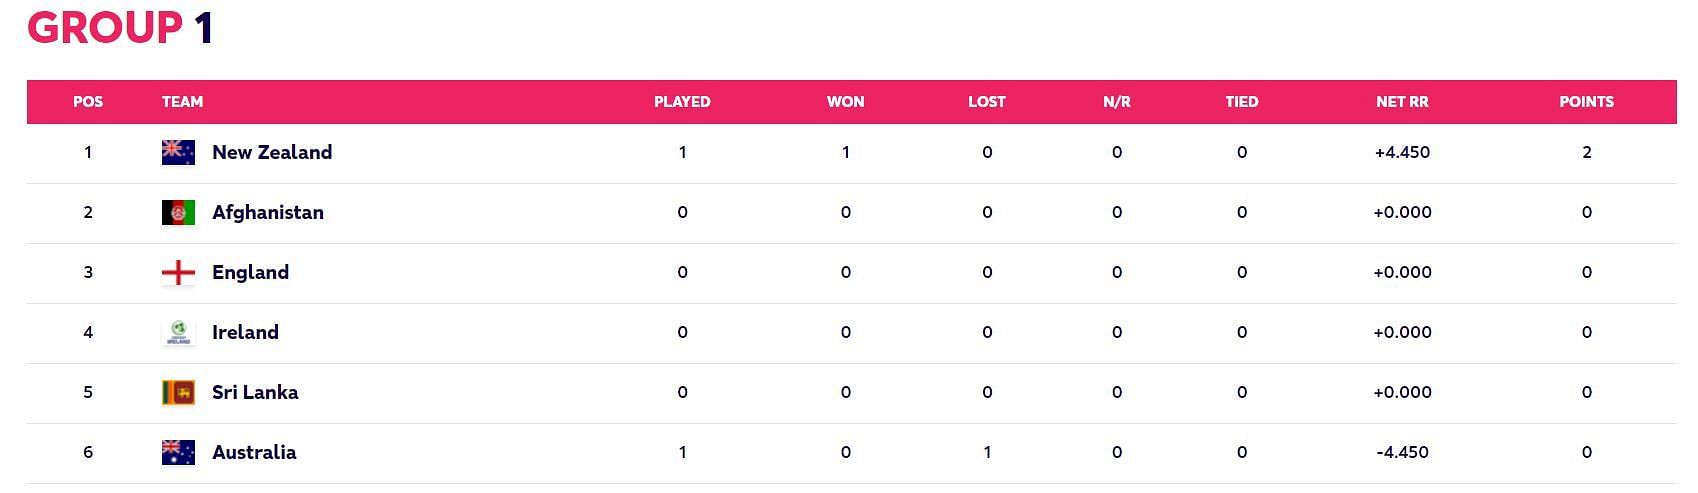 Updated Points Table after Match 13 (Image Courtesy: www.t20worldcup.com)